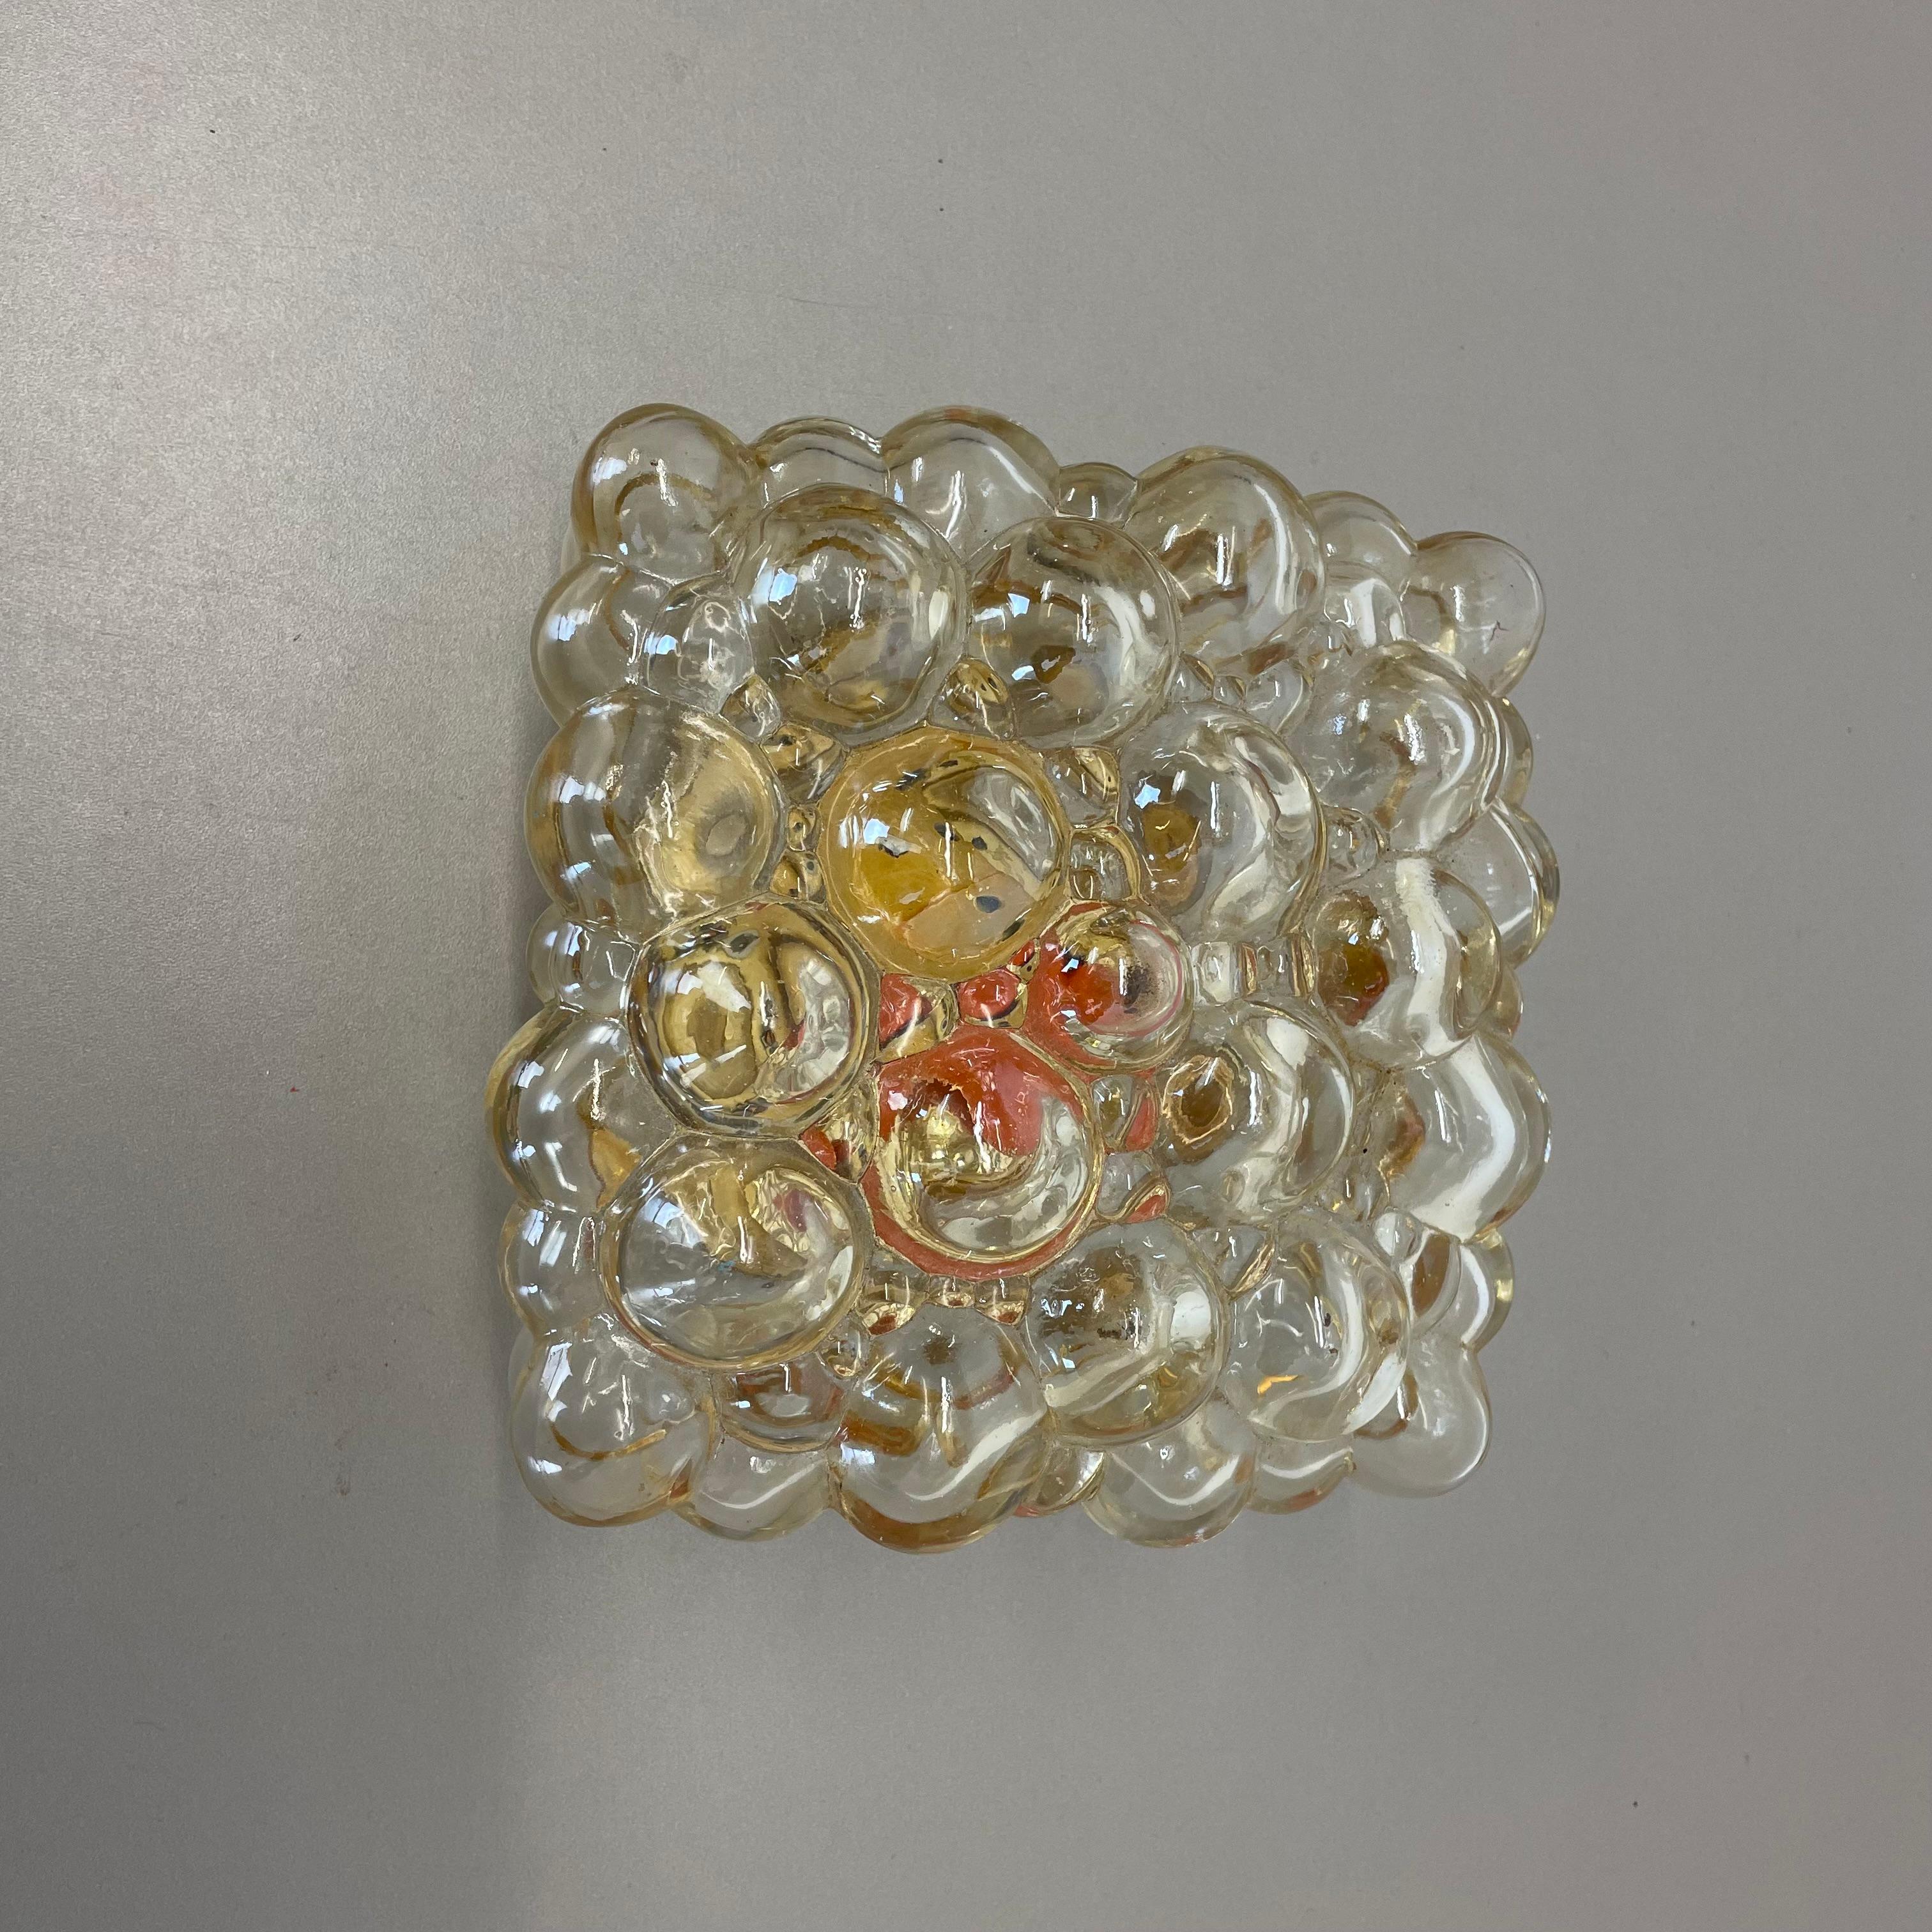 NOTICE: the red spot that is visible underneath the glass comes from a red bulb, that was screwed into the socket.


Article:

wall light



Producer: 

Glashütte Limburg, Germany


Design:

Helena Tynell


Origin: 

Germany


Age: 

1960s





This